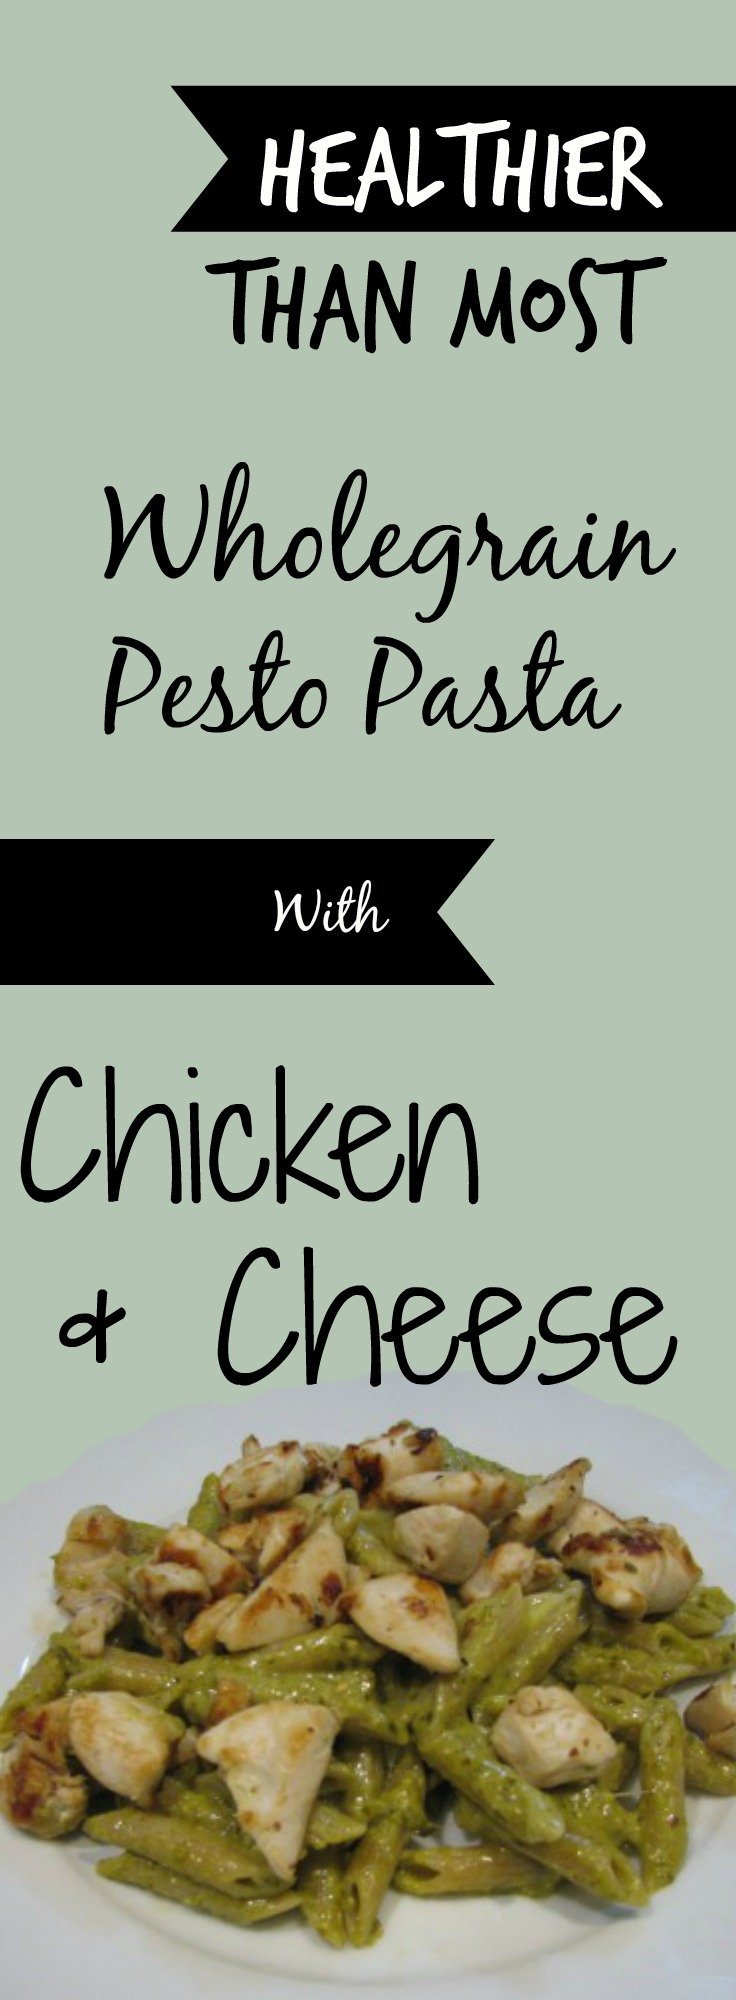 Delicious Pesto pasta with chicken and cheese, plus it's a healthier alternative by switching out some of the basic ingredients...